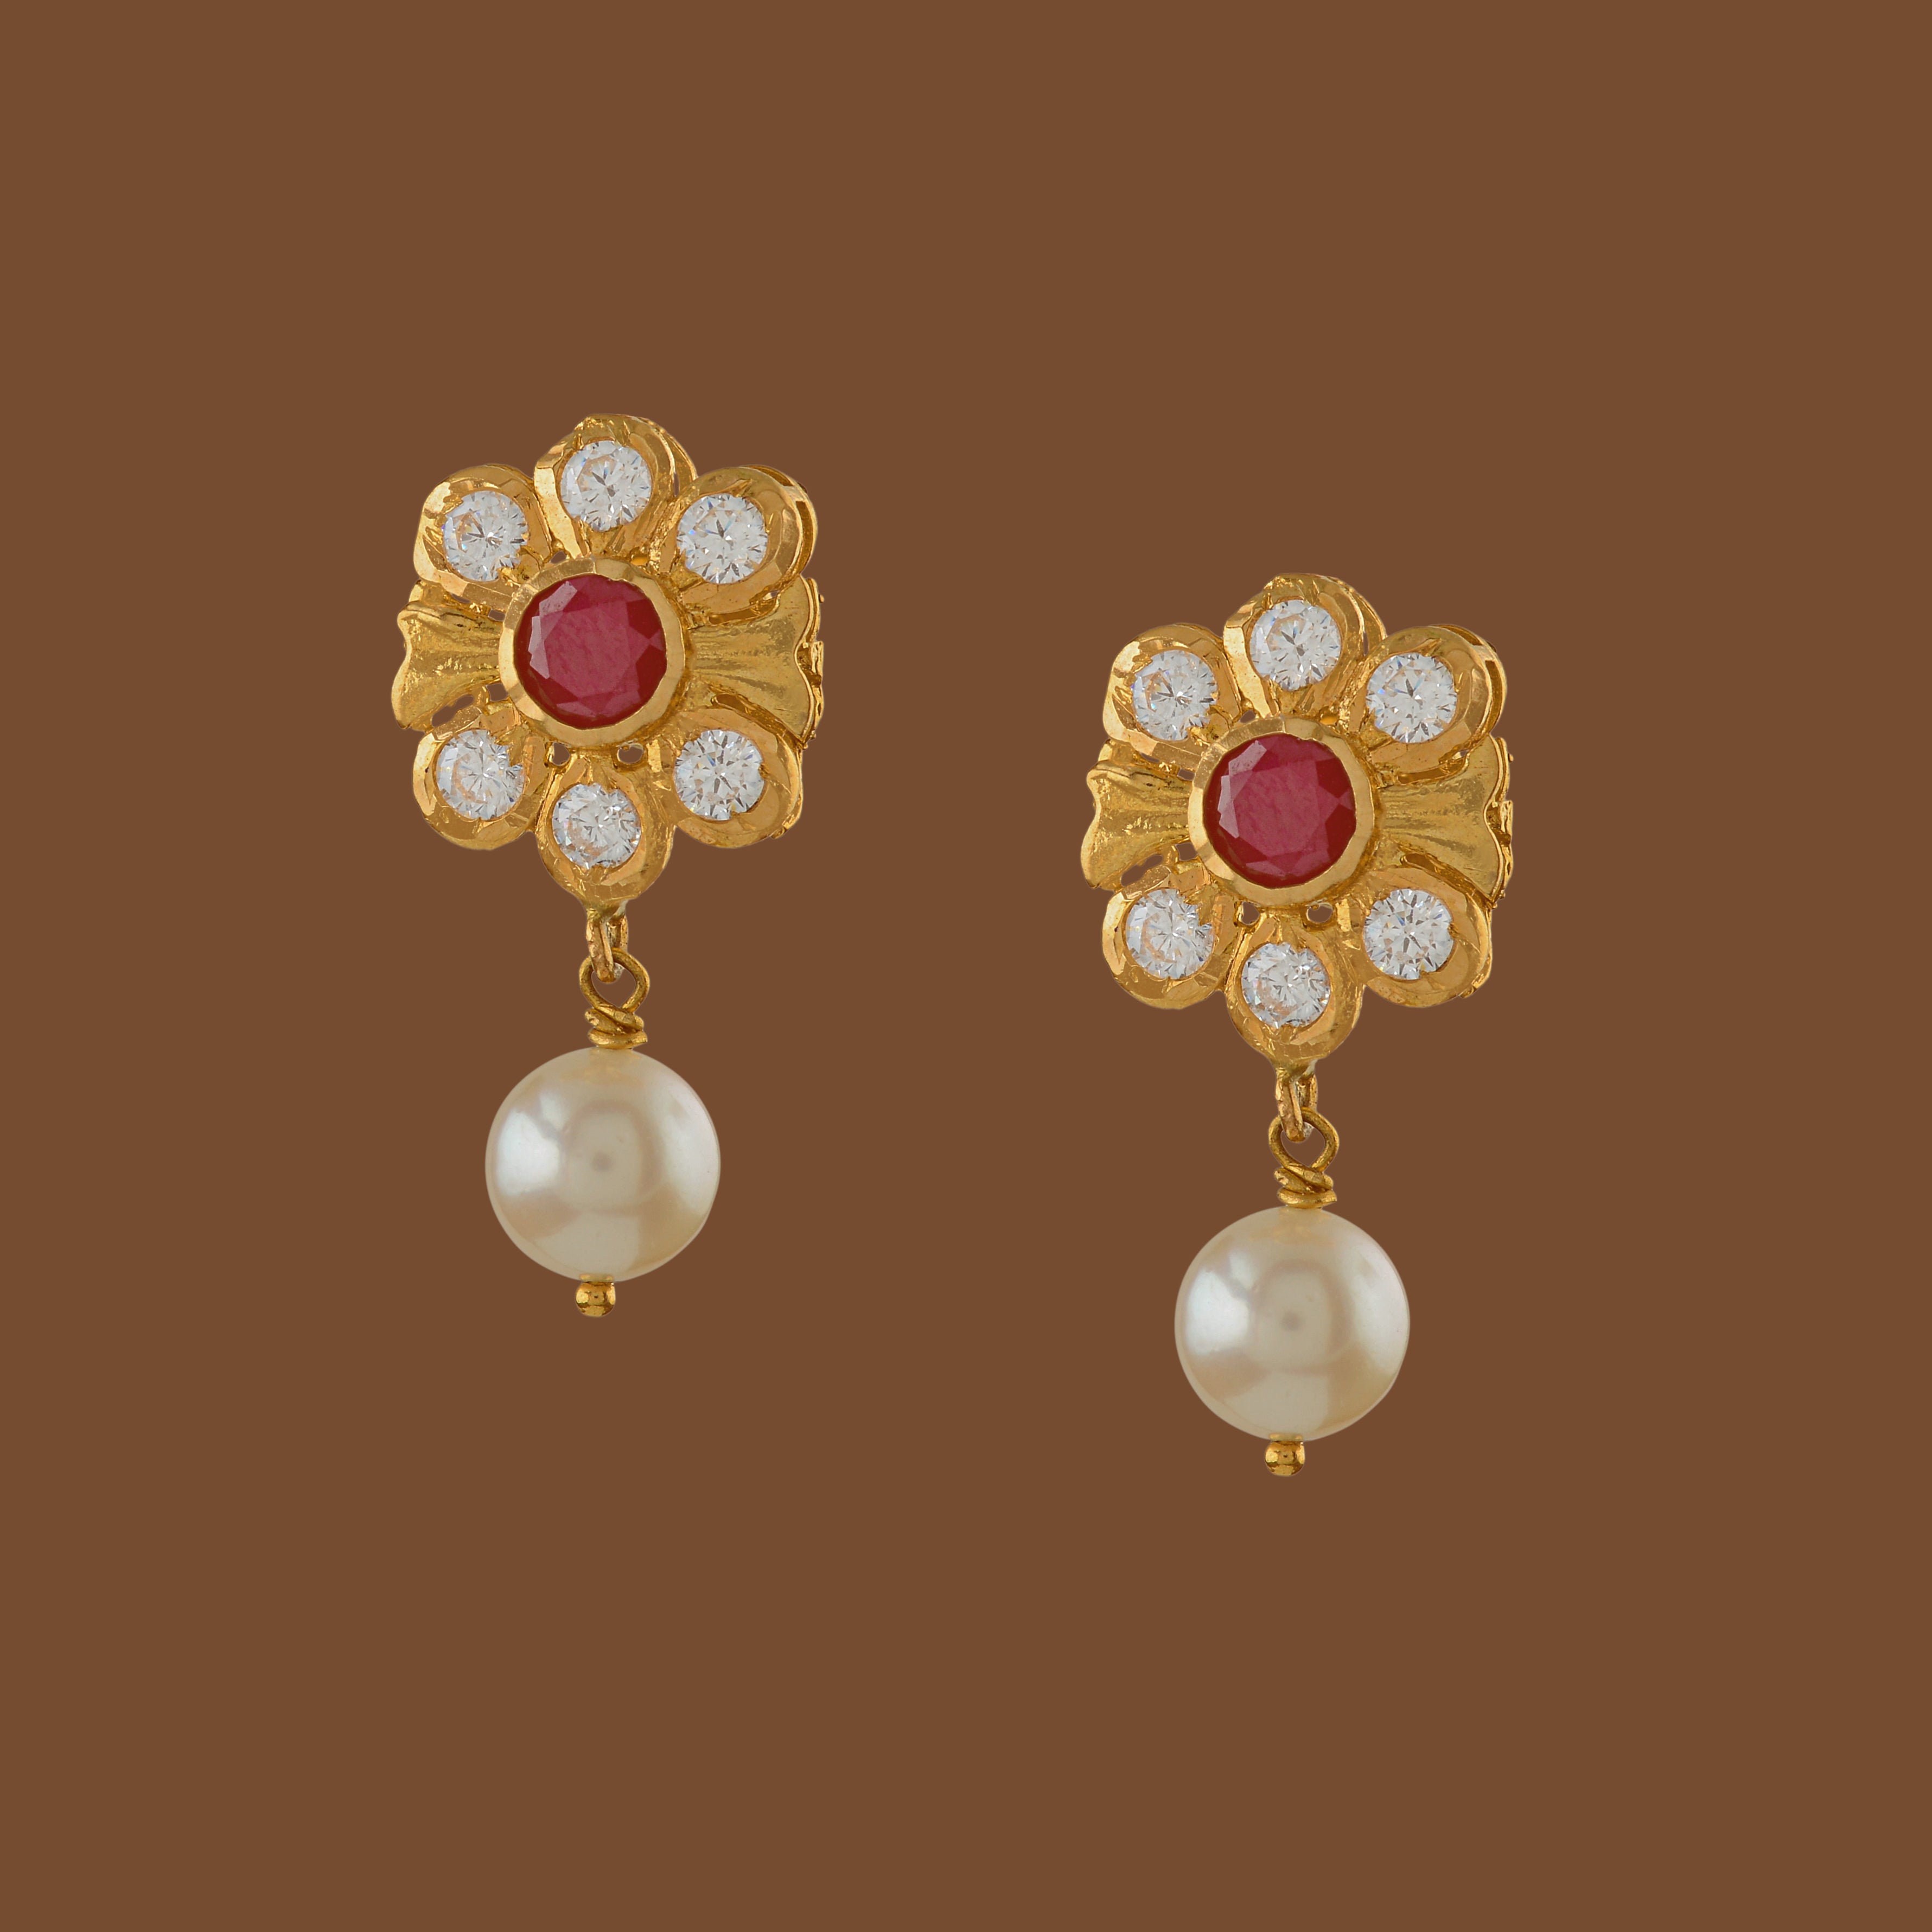 Floral Diamond Earrings With Pearl Drops